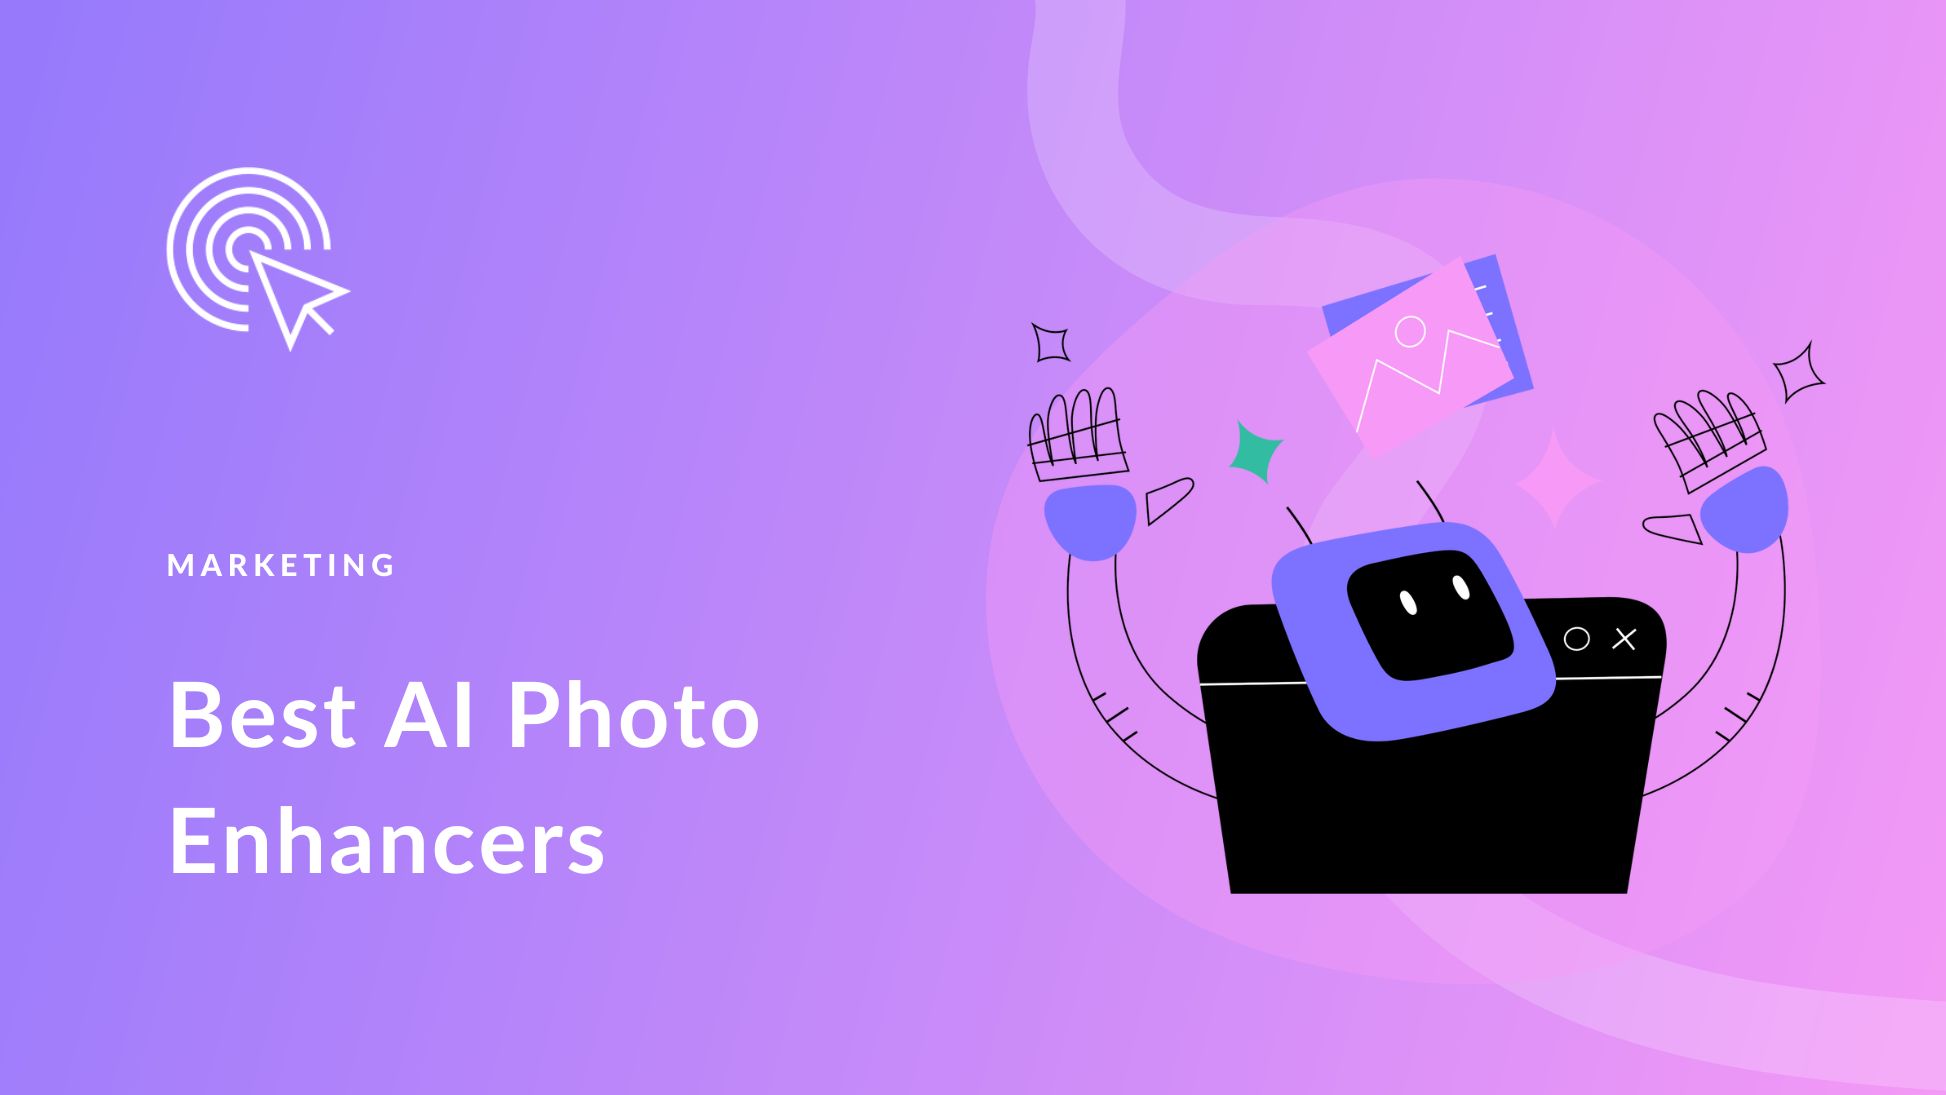 7 Best AI Photo Enhancers in 2023 (Compared & Ranked)